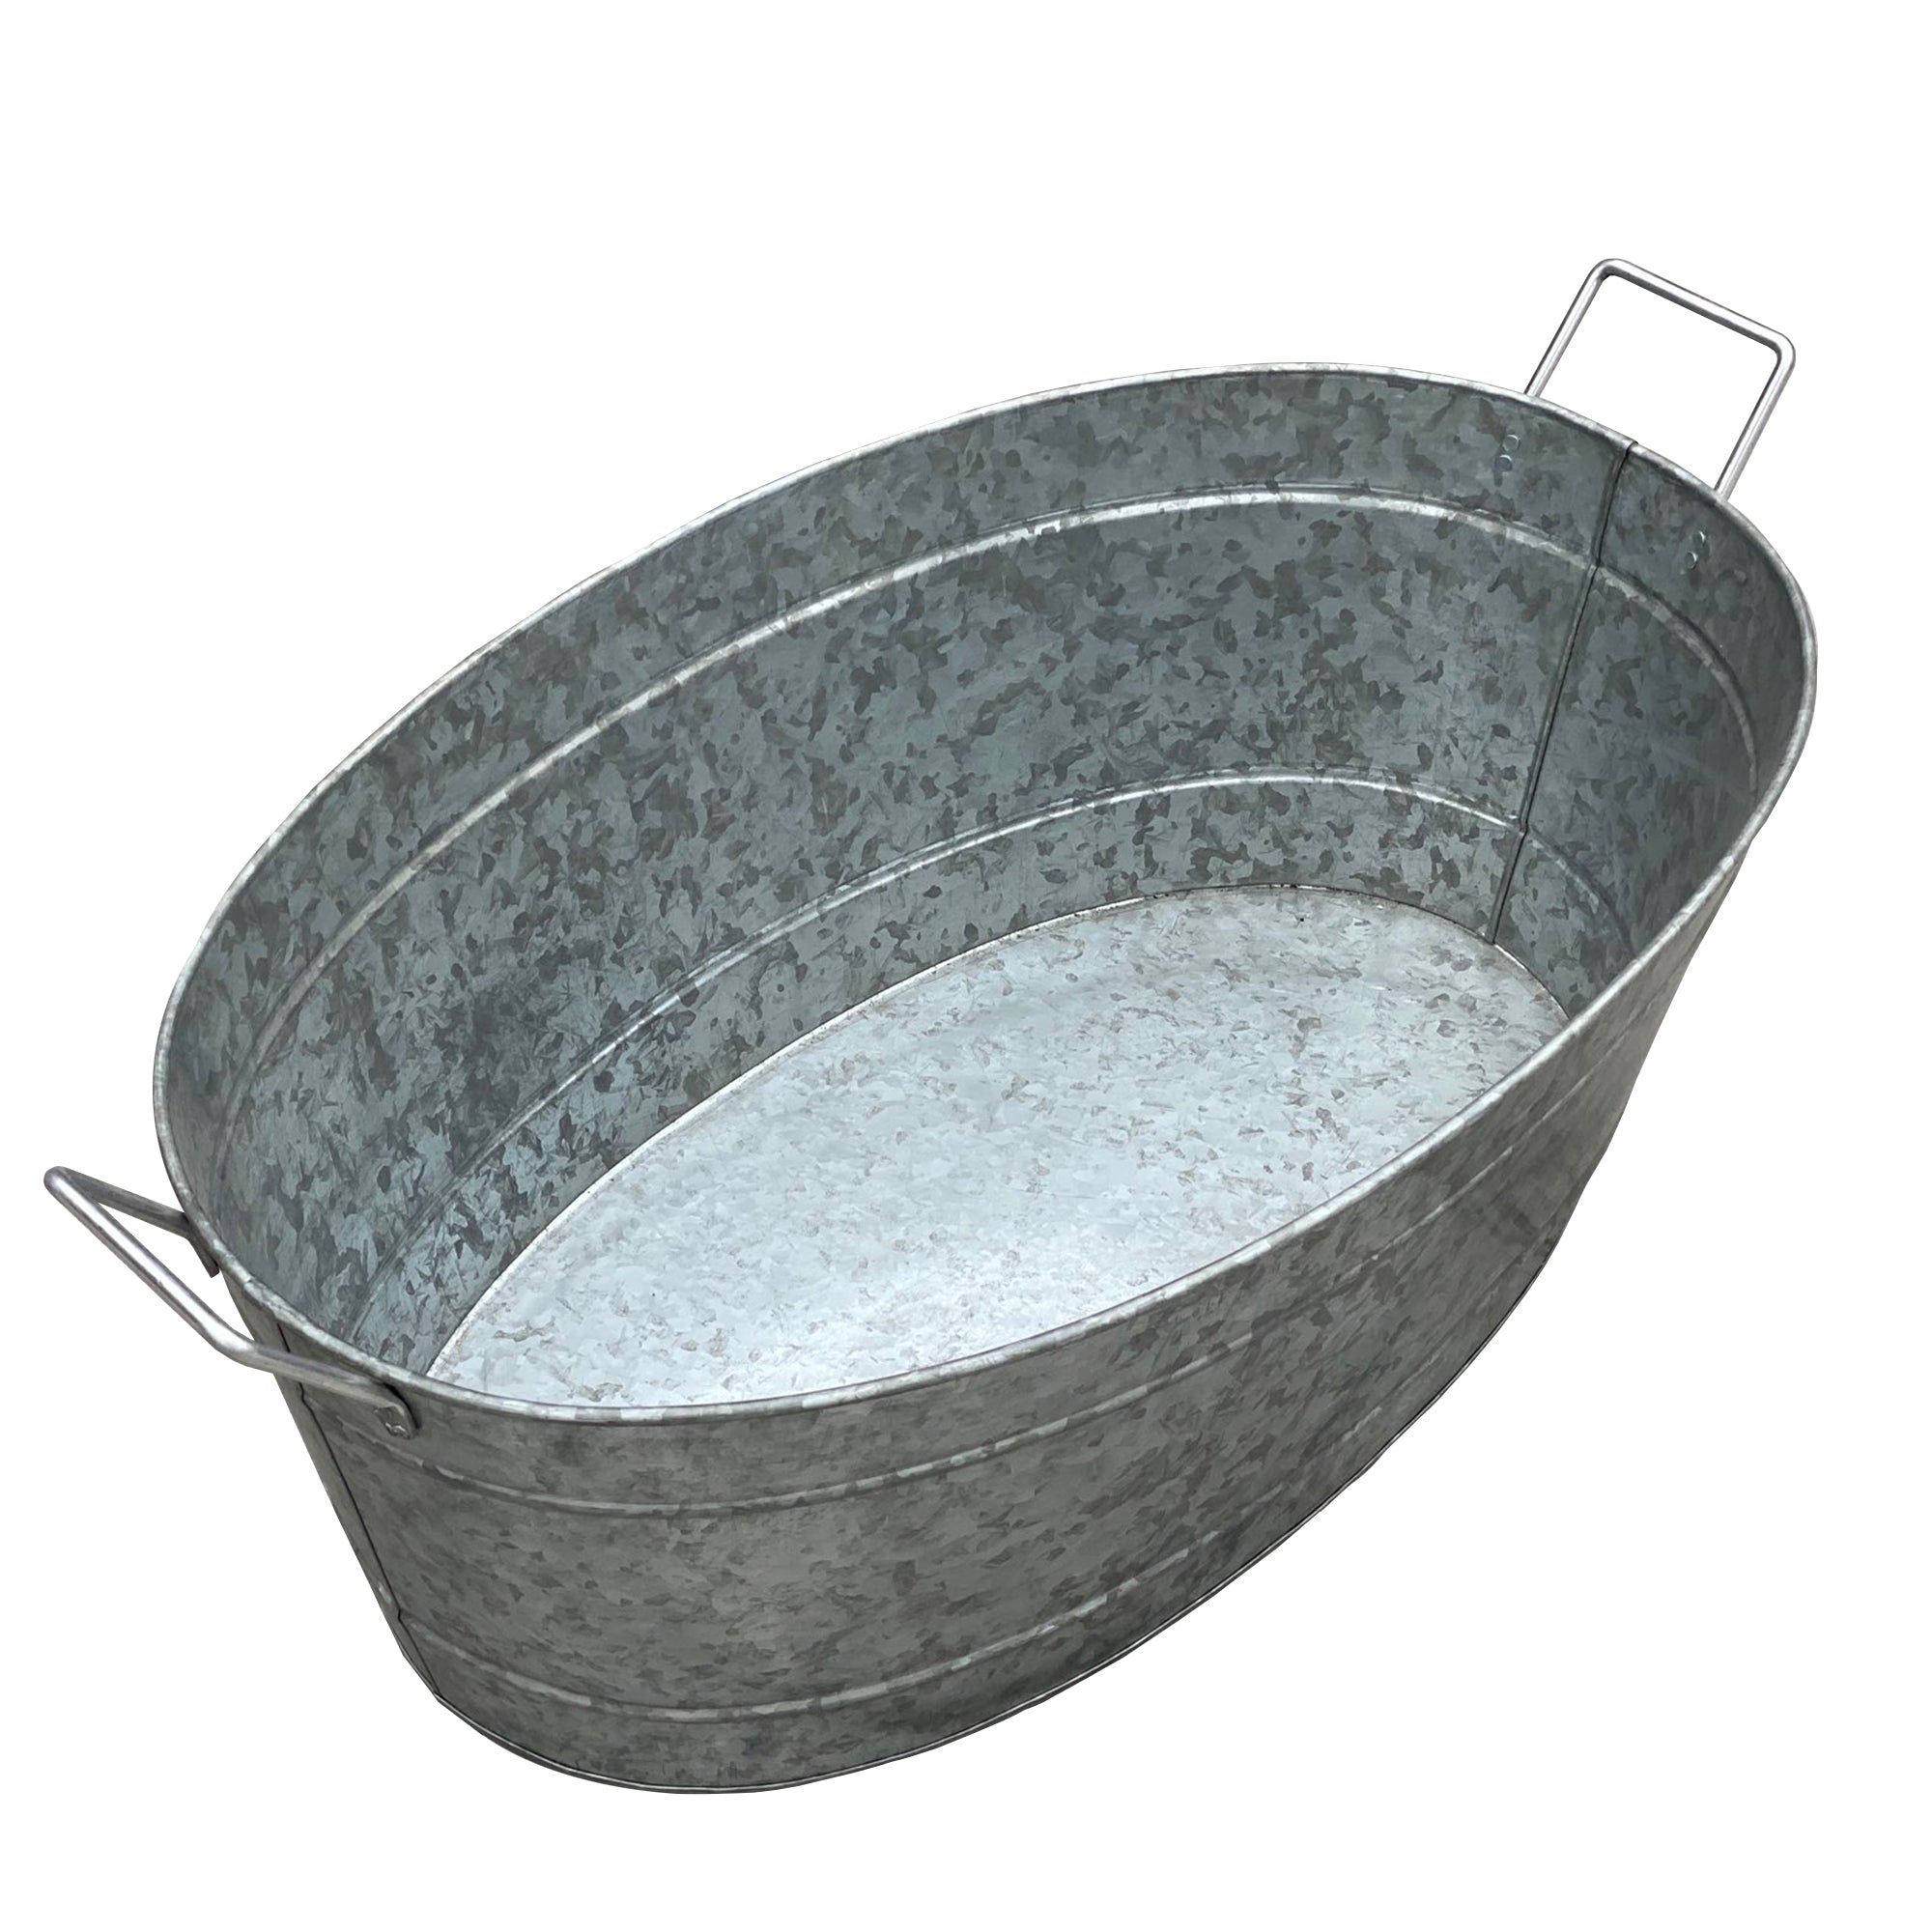 Embossed Design Oval Shape Galvanized Steel Tub with